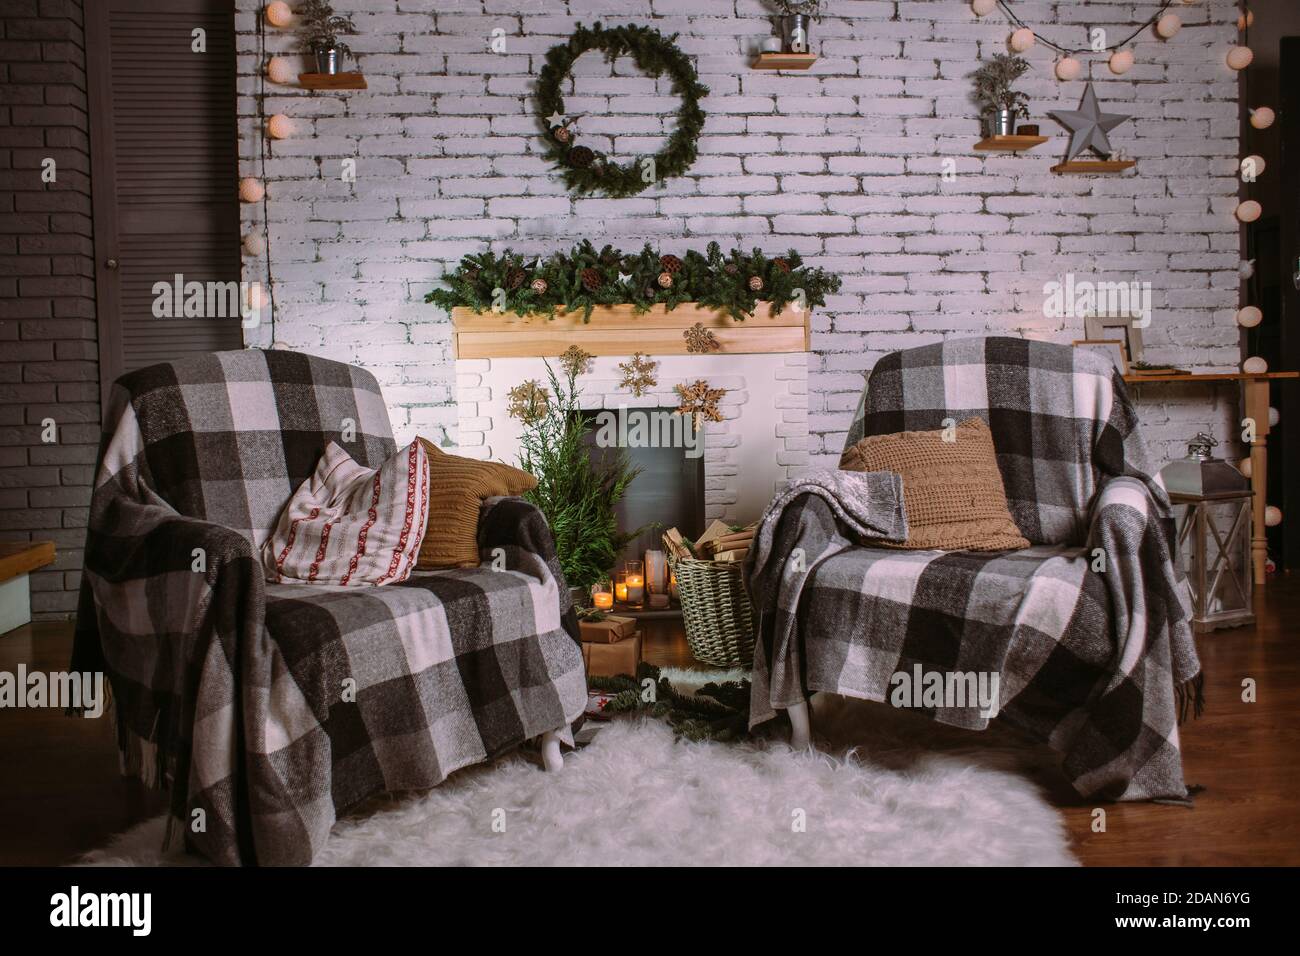 Two armchairs covered with cozy blankets standing near fireplace decorated with garland, candles and basket with gifts. Round green wreath hanging on Stock Photo